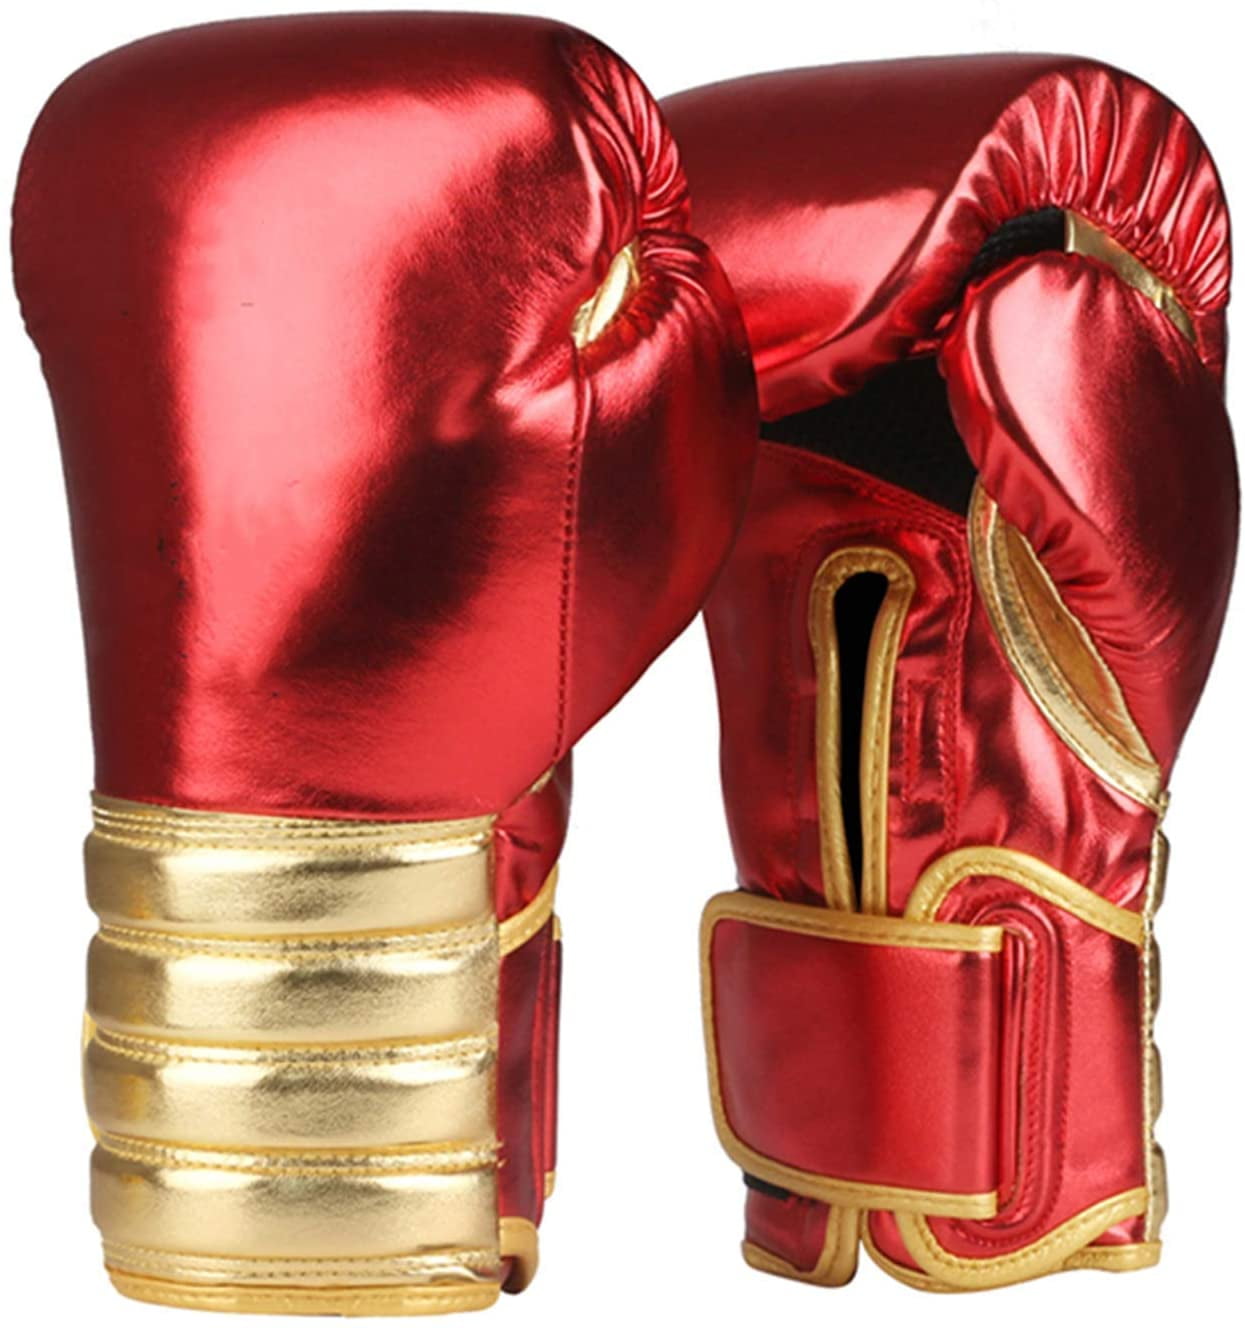 Sparring Heavy Bag Workout MMA Gloves for Men & Women LangRay Leather Boxing Fight Gloves Kickboxing Punch Bag Gloves Boxing Training Gloves for Muay Thai